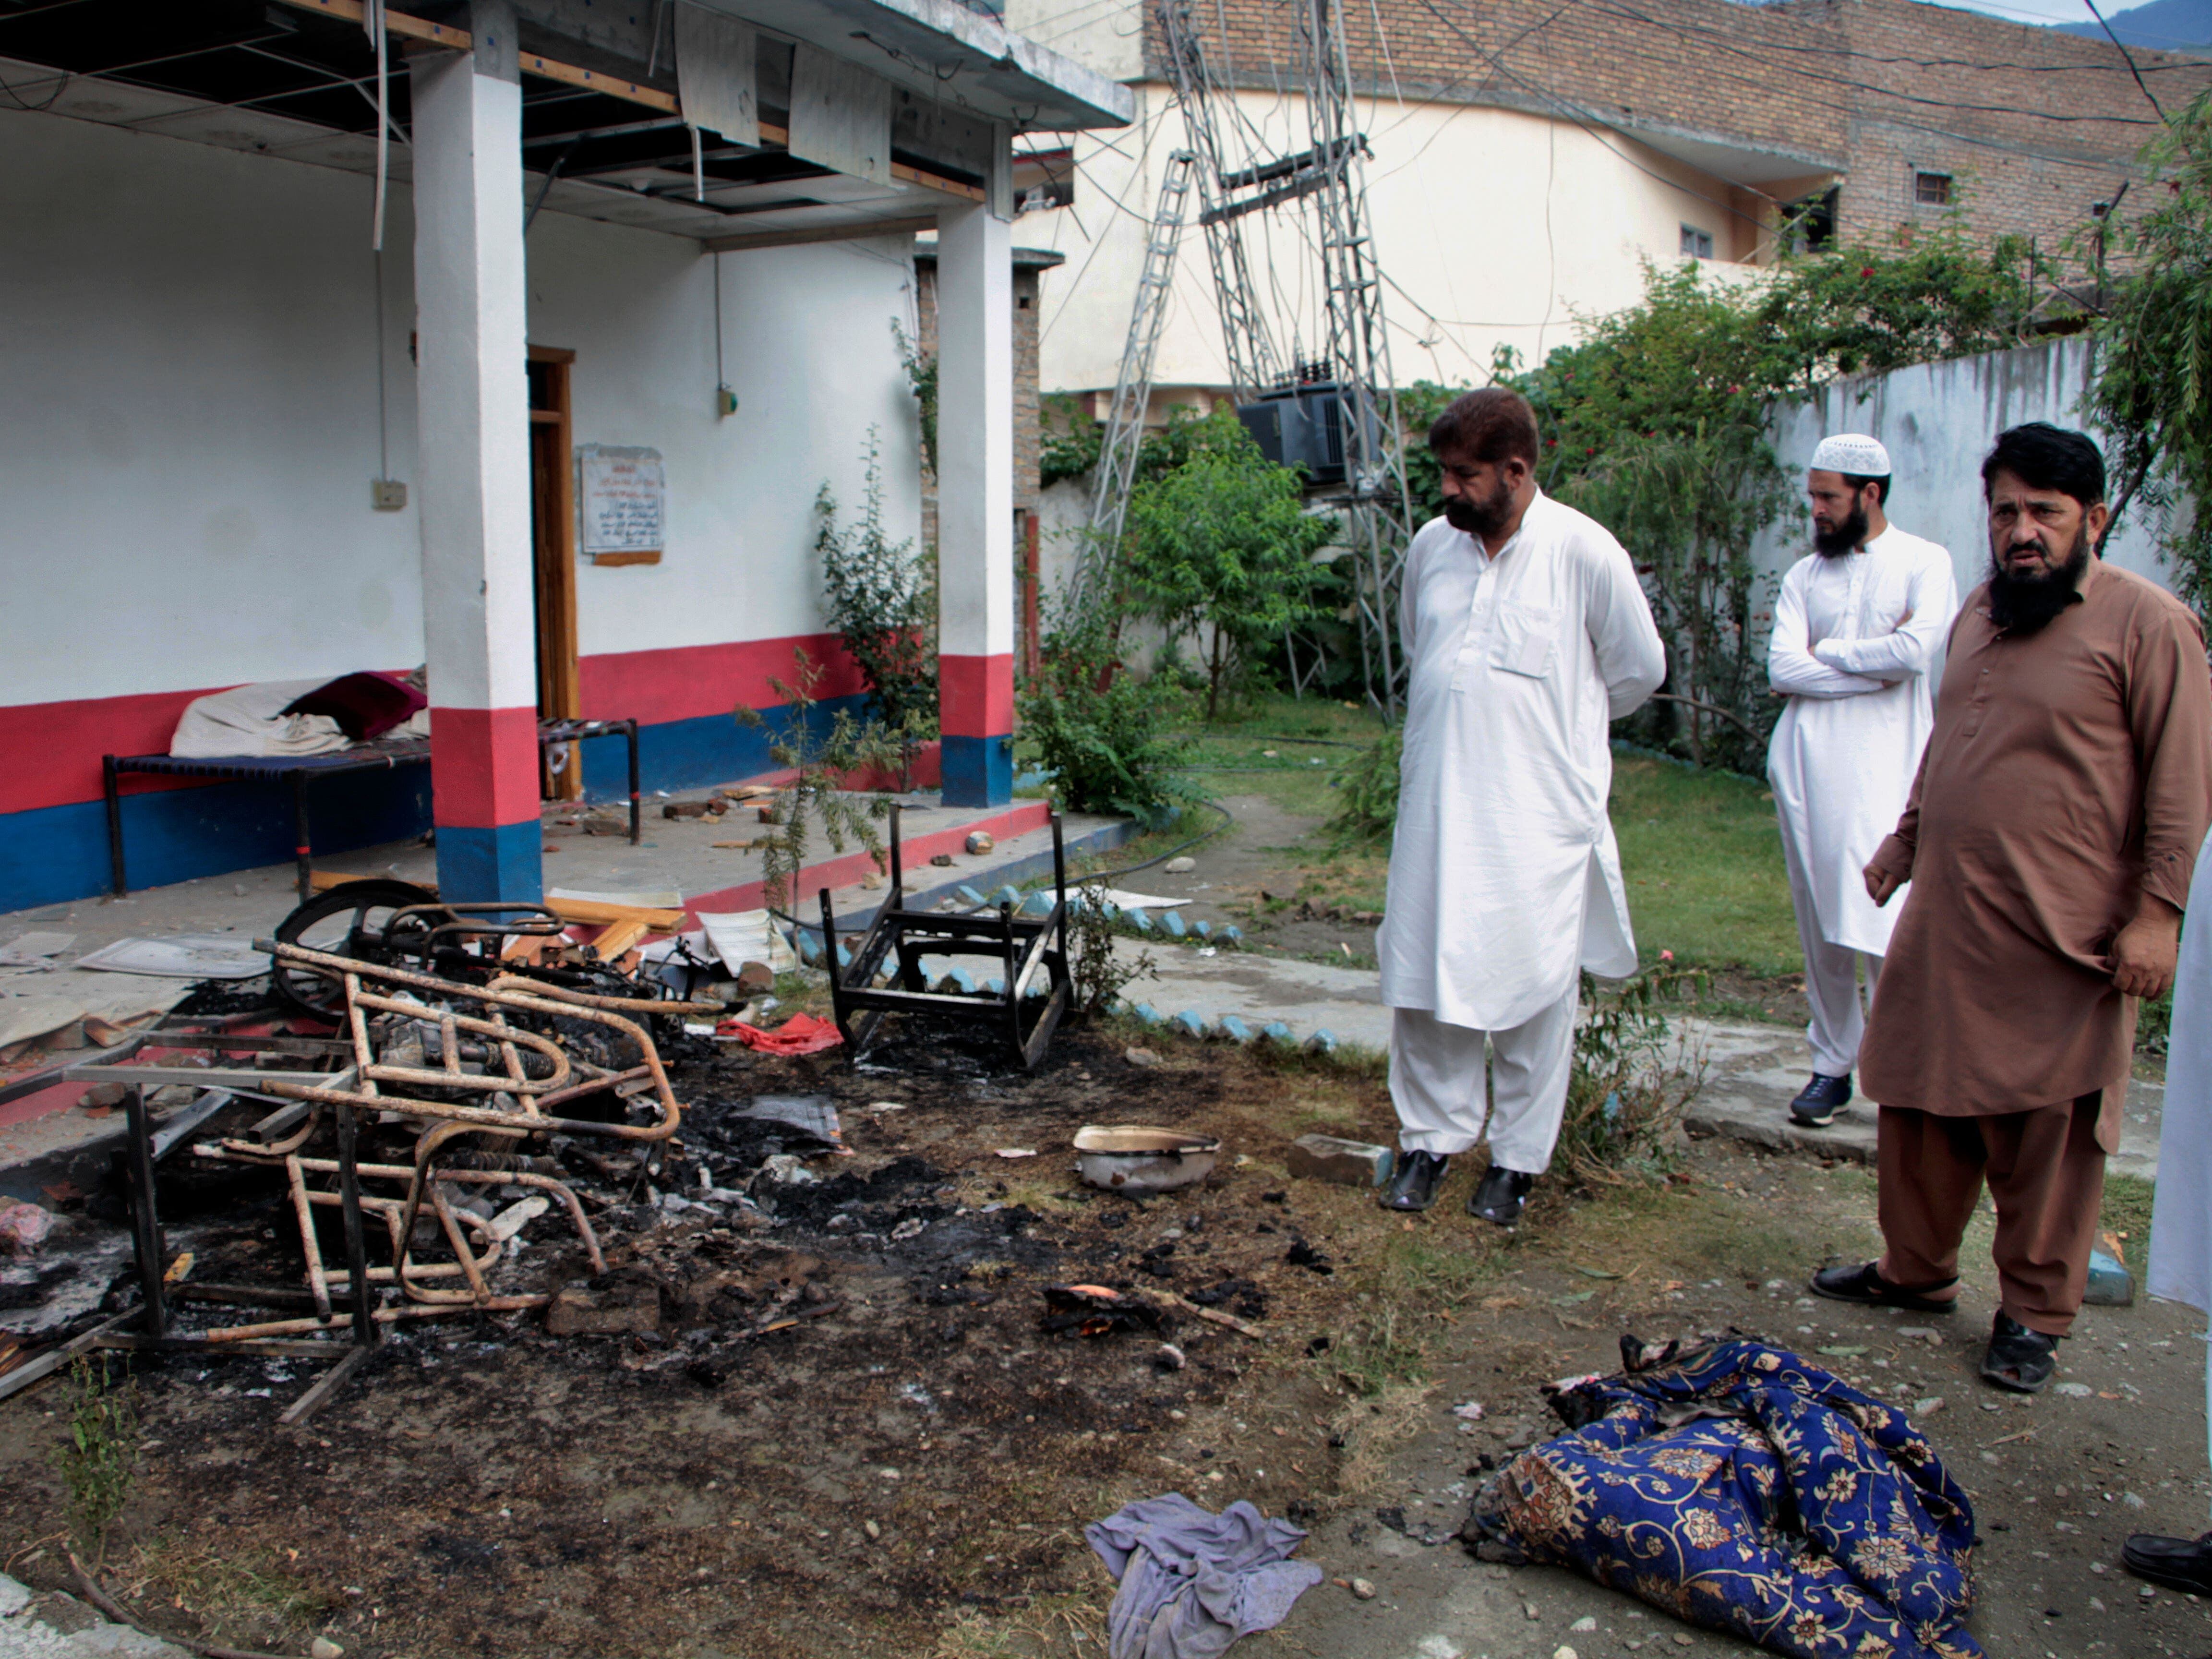 Muslim mob torches police station and lynches man accused of blasphemy